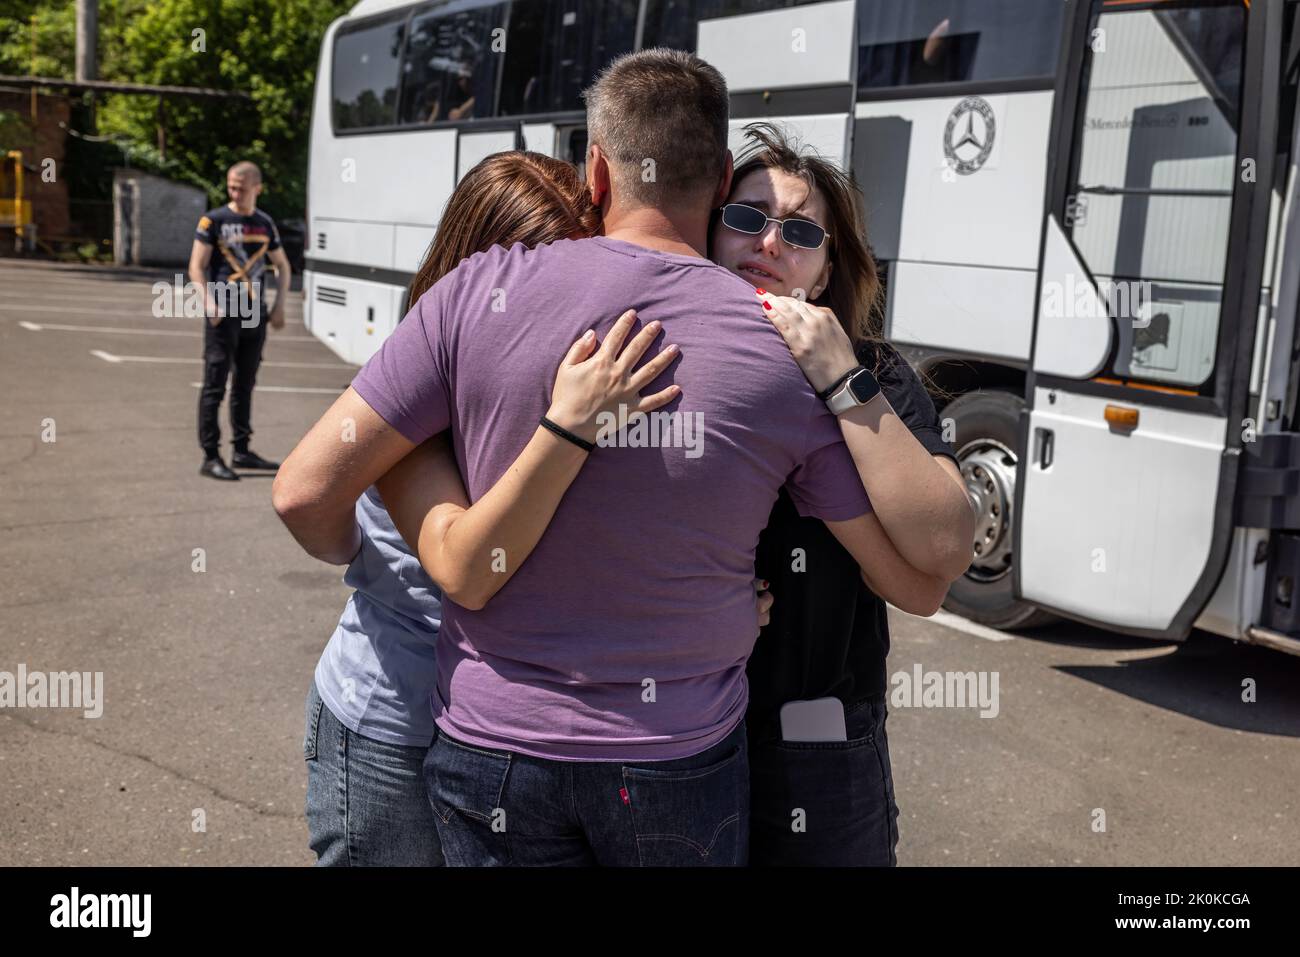 Two buses have arrived from Chisinau in Moldova at a refugee collection point in the center of embattled Mykolaiv in Ukraine to evacuate 110 refugees from the combat zone in Mykolaiv and the surrounding area. Here there are tearful farewell toasts before the journey can begin, first to Chisinau in Moldova. Most of them then want to continue their journey to Germany. Stock Photo